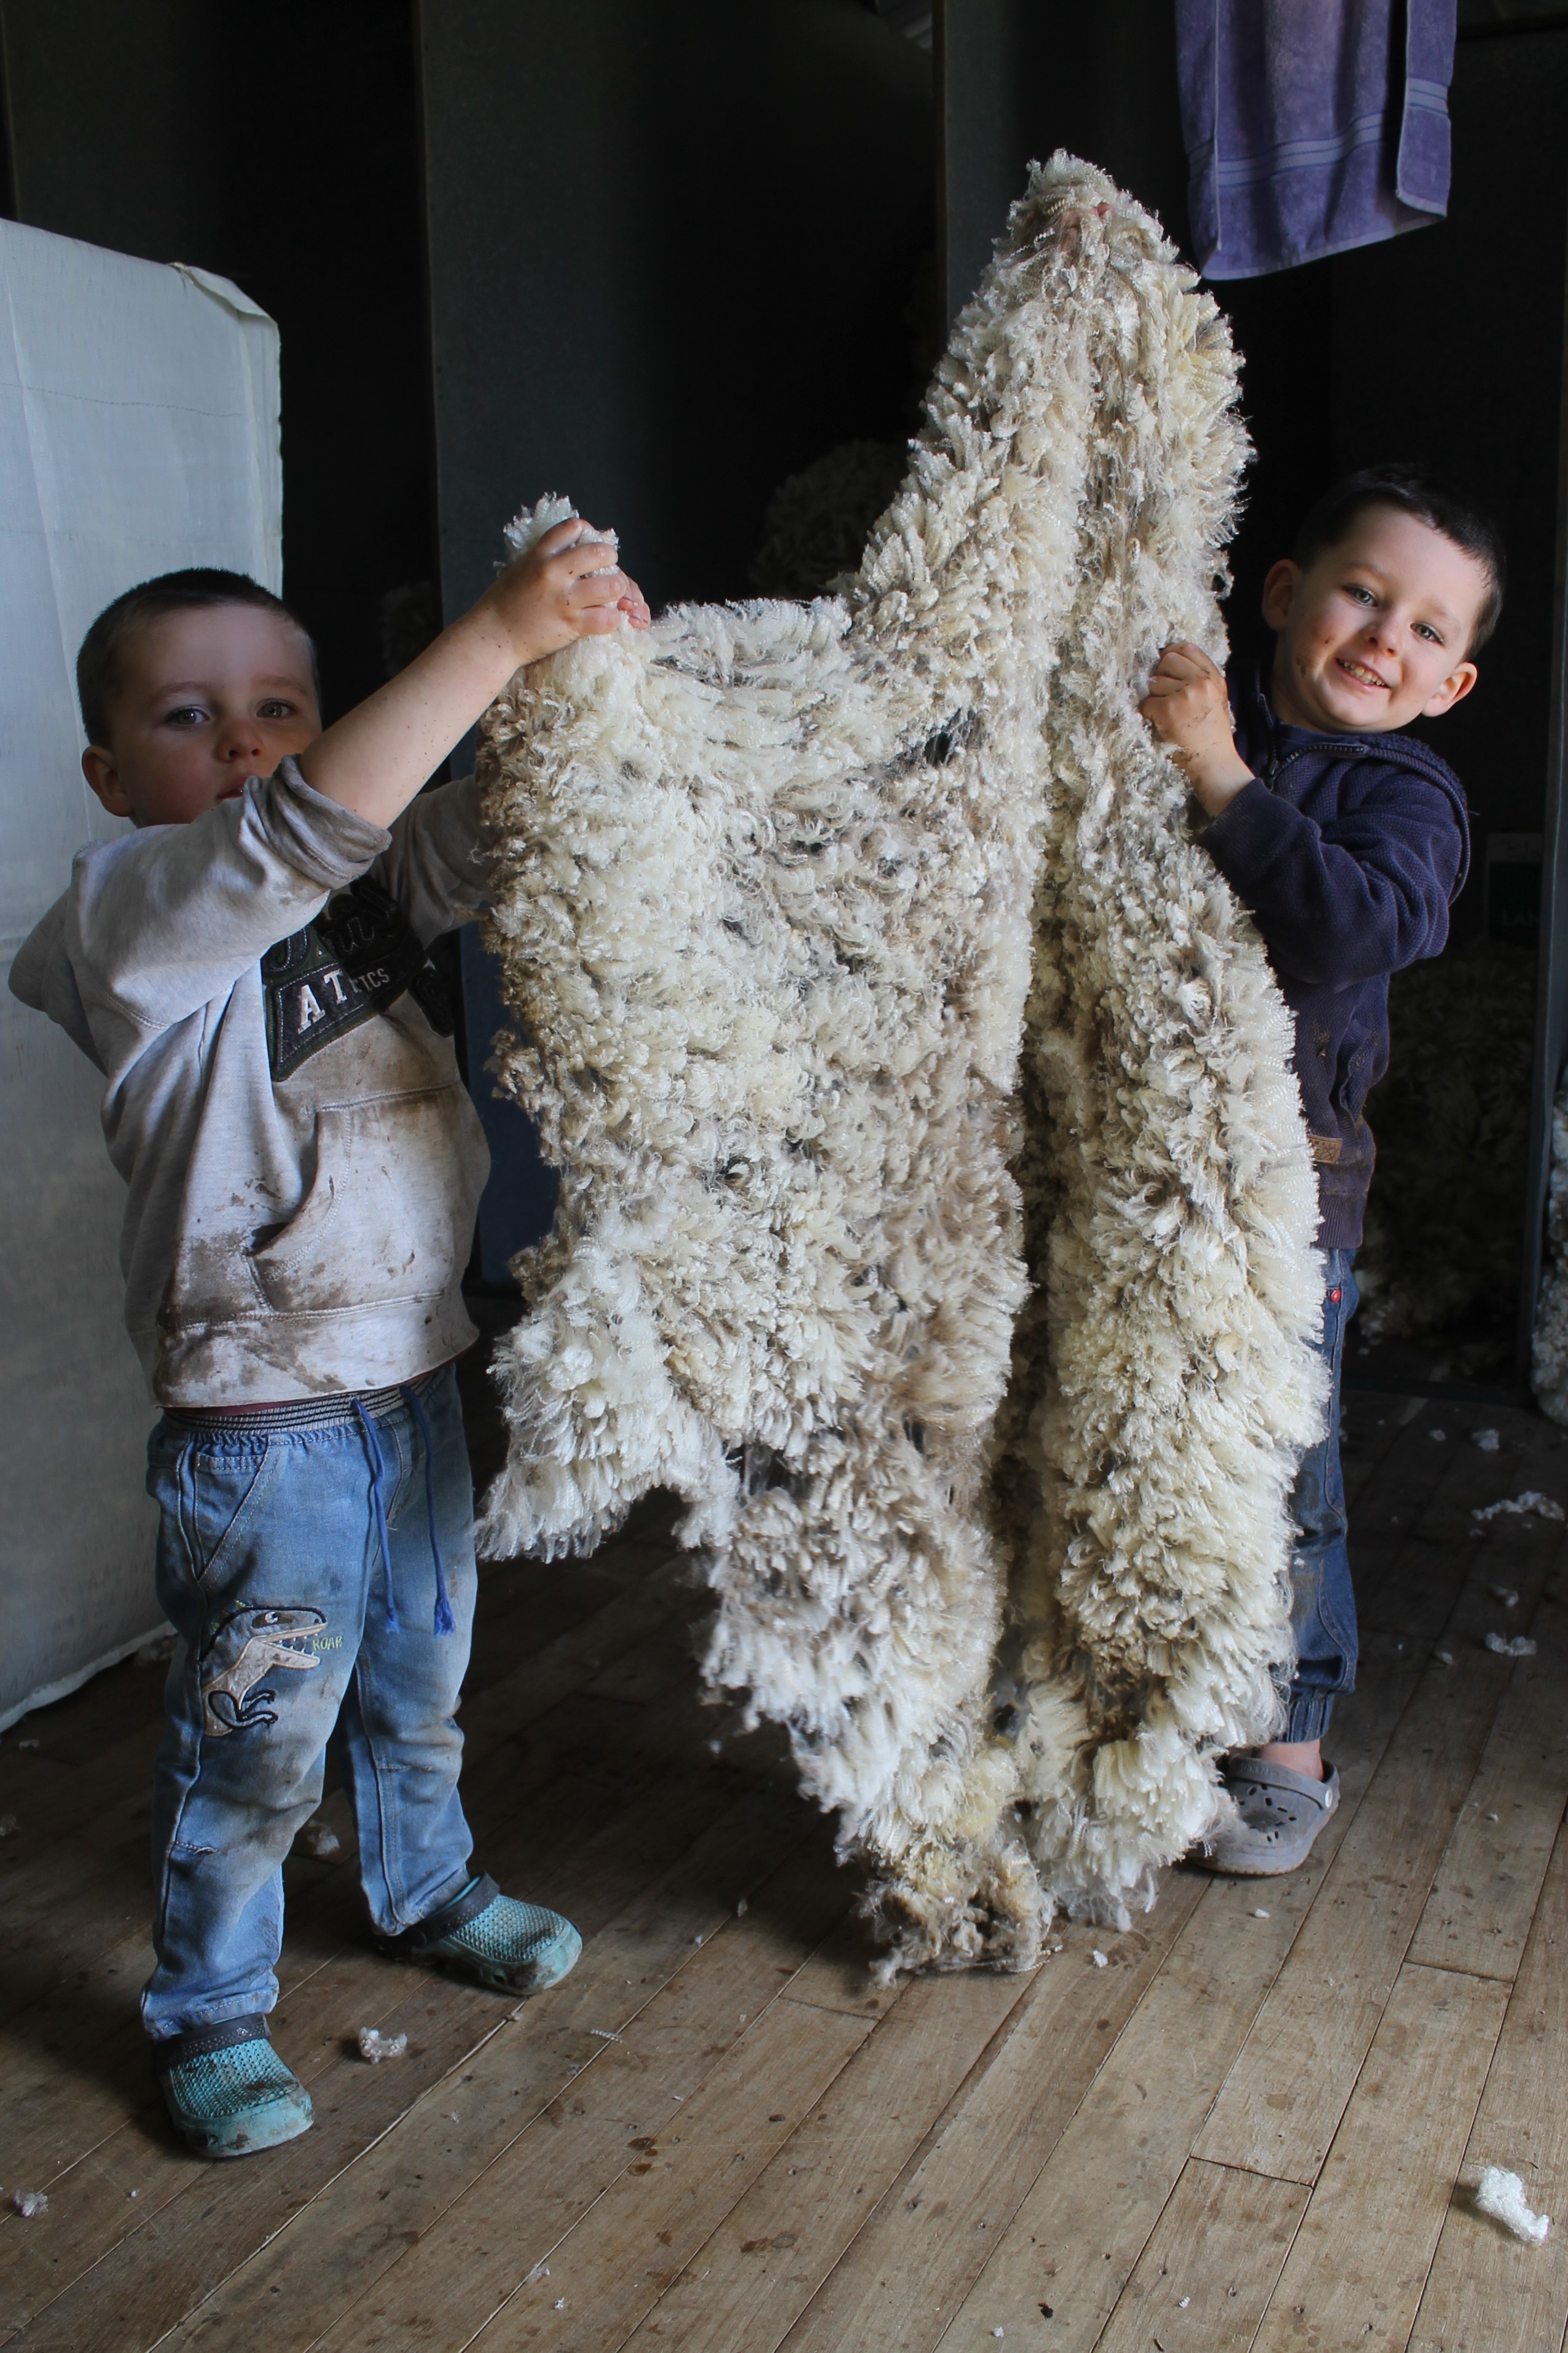 That's a lot of belly wool!